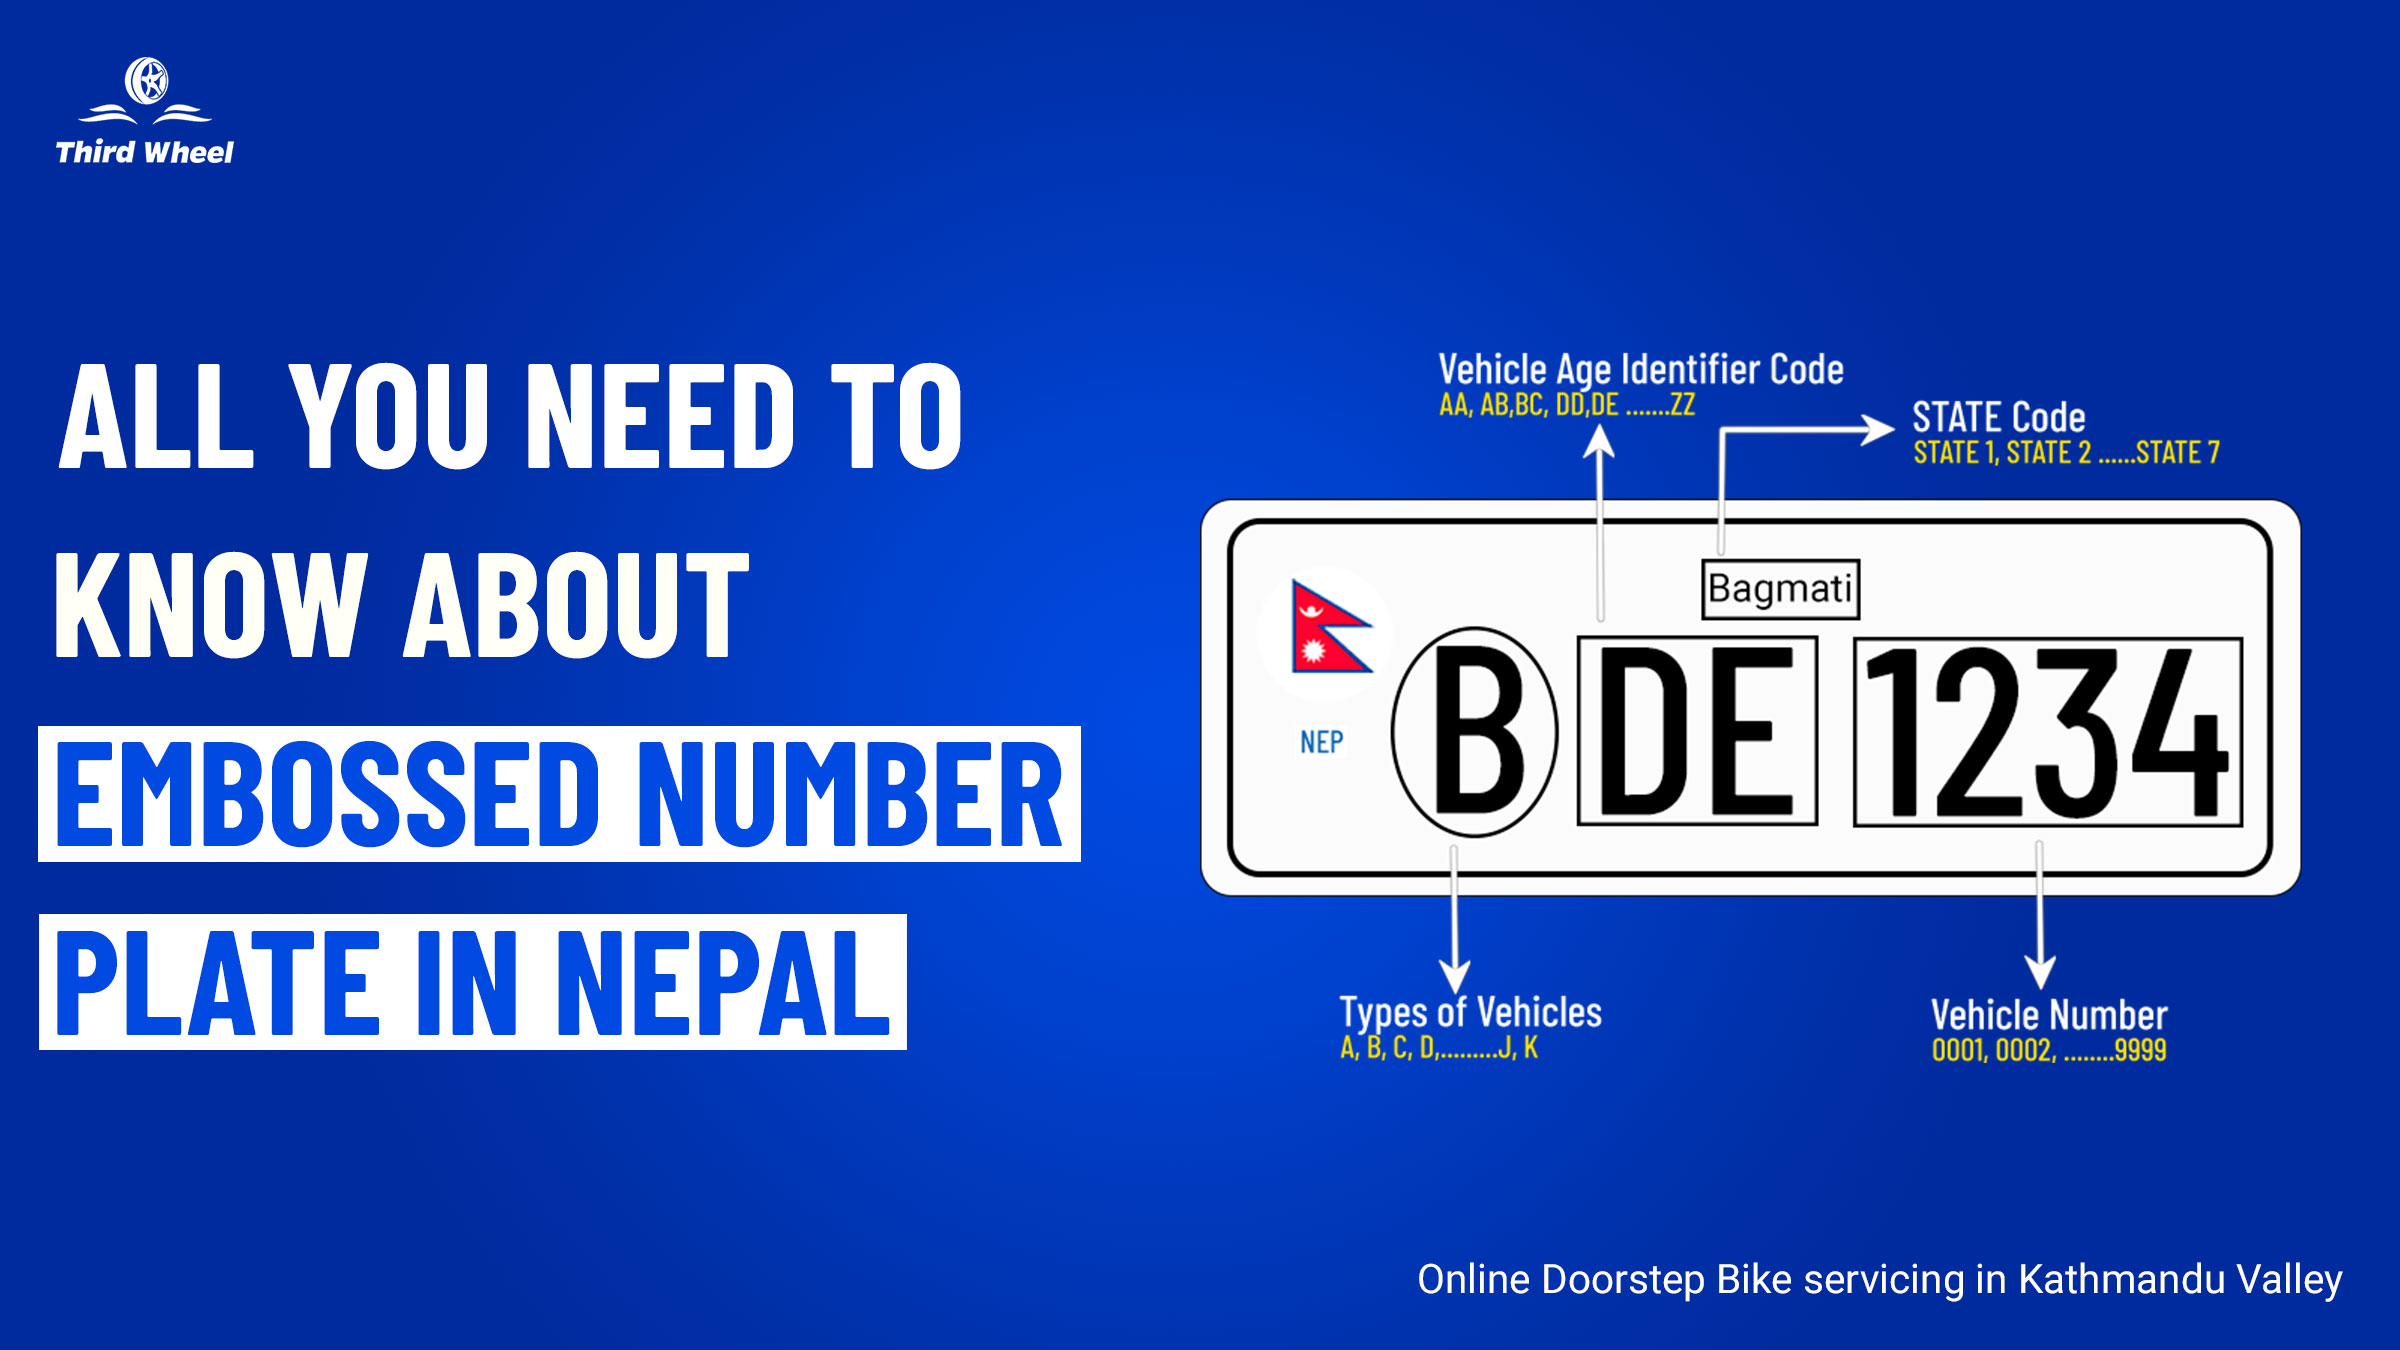 All you need to know about Embossed Number Plate in Nepal